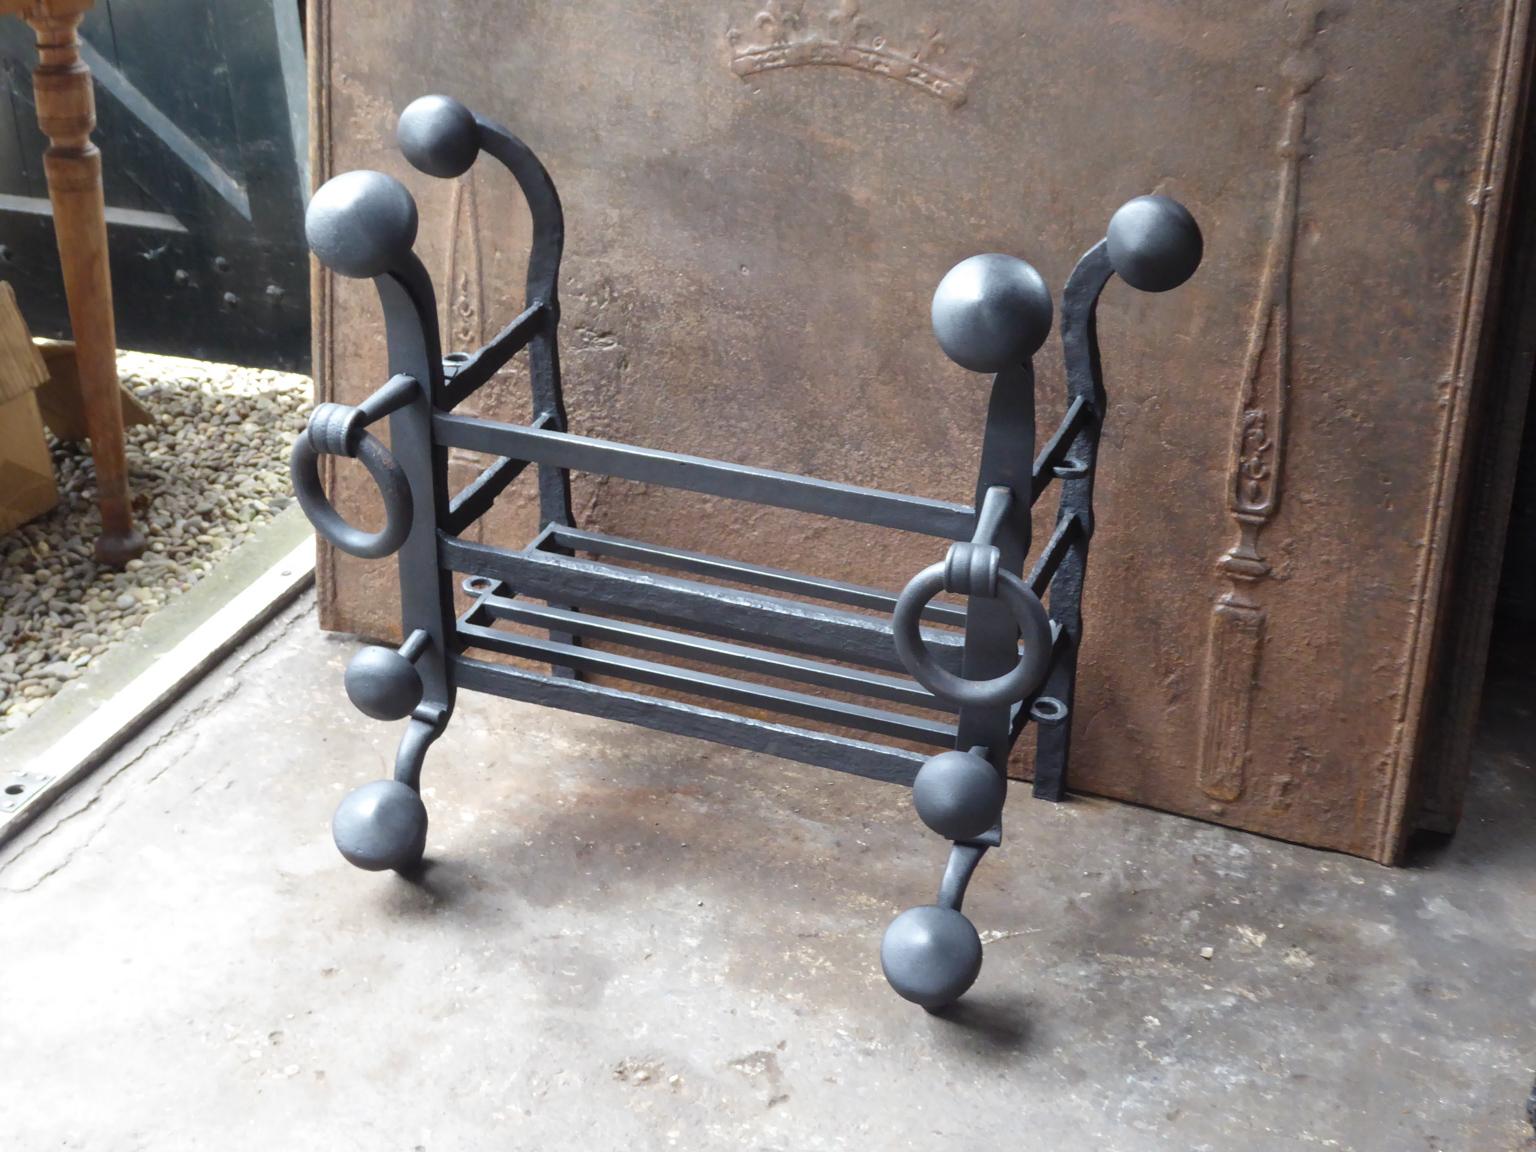 Forged Antique Dutch Fireplace Grate, 17th-18th Century For Sale